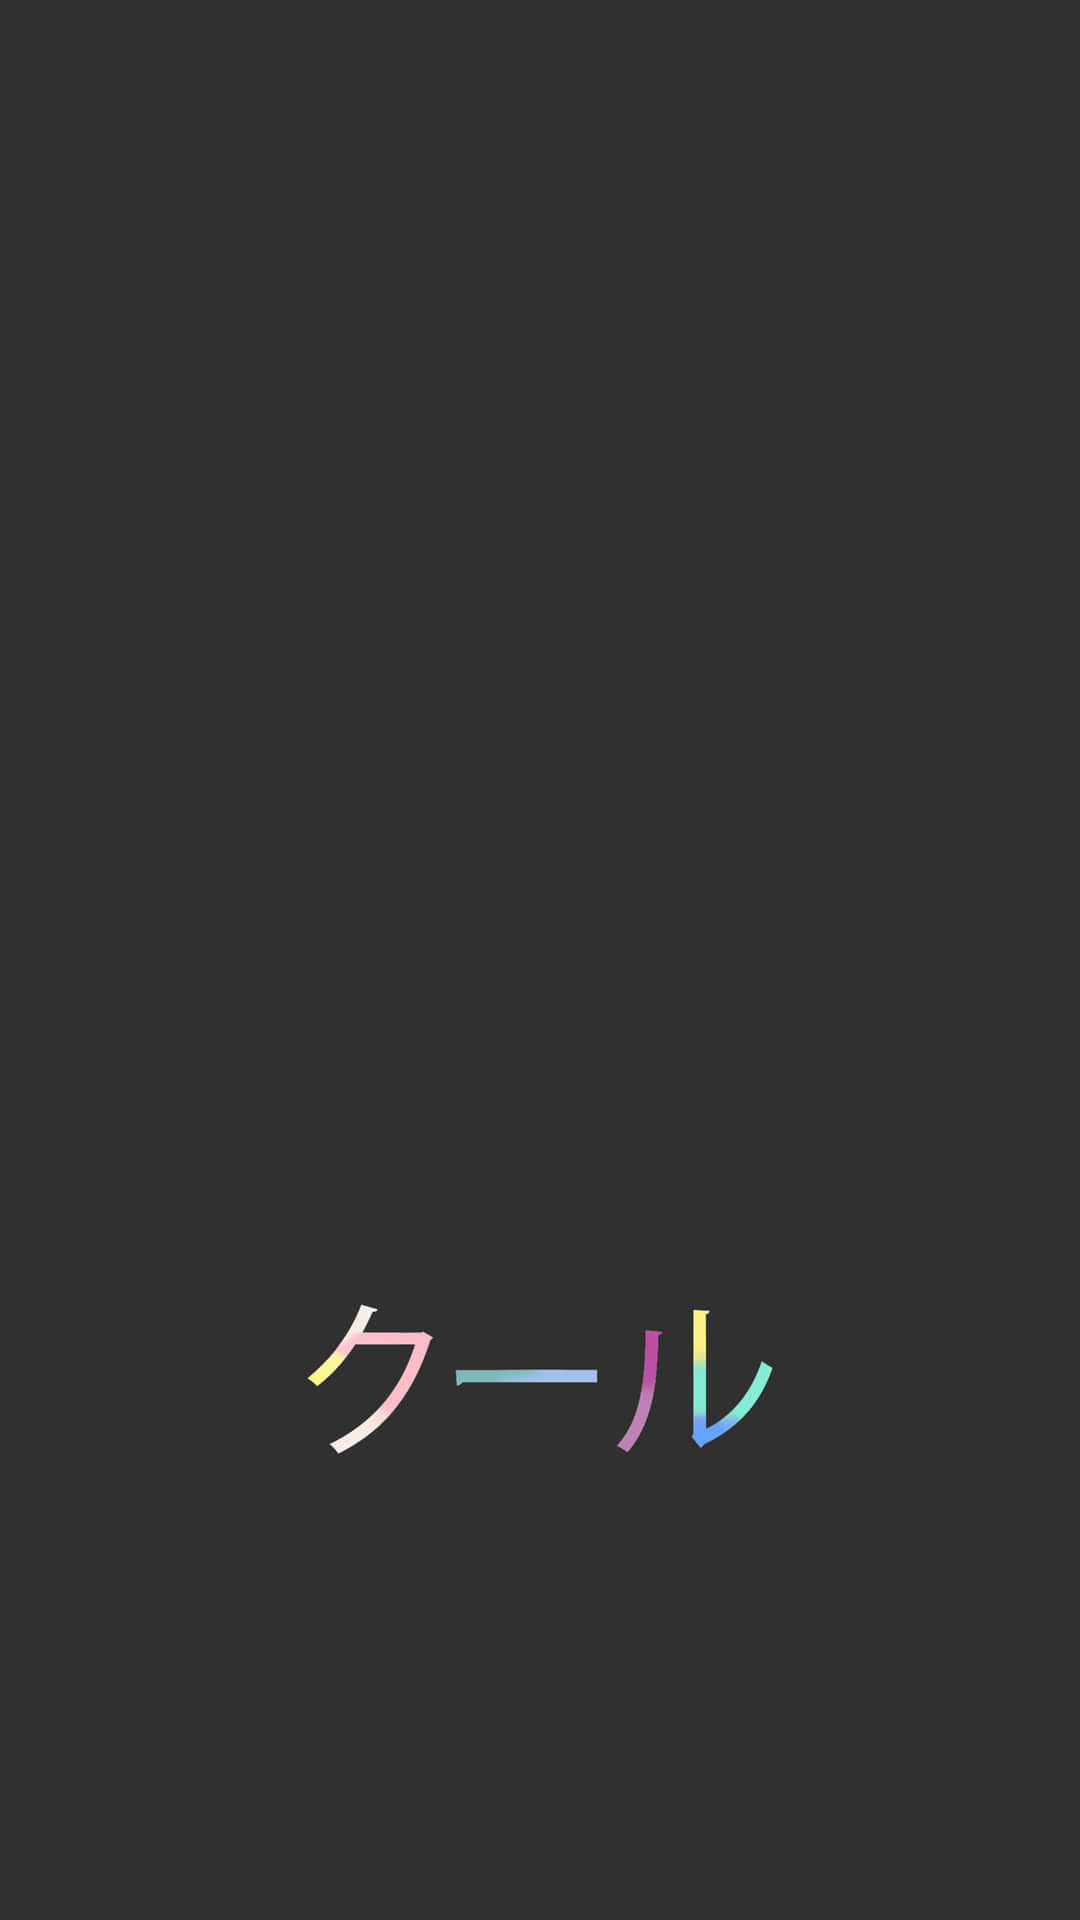 Embrace minimalist style with this Dark Japanese iPhone wallpaper Wallpaper